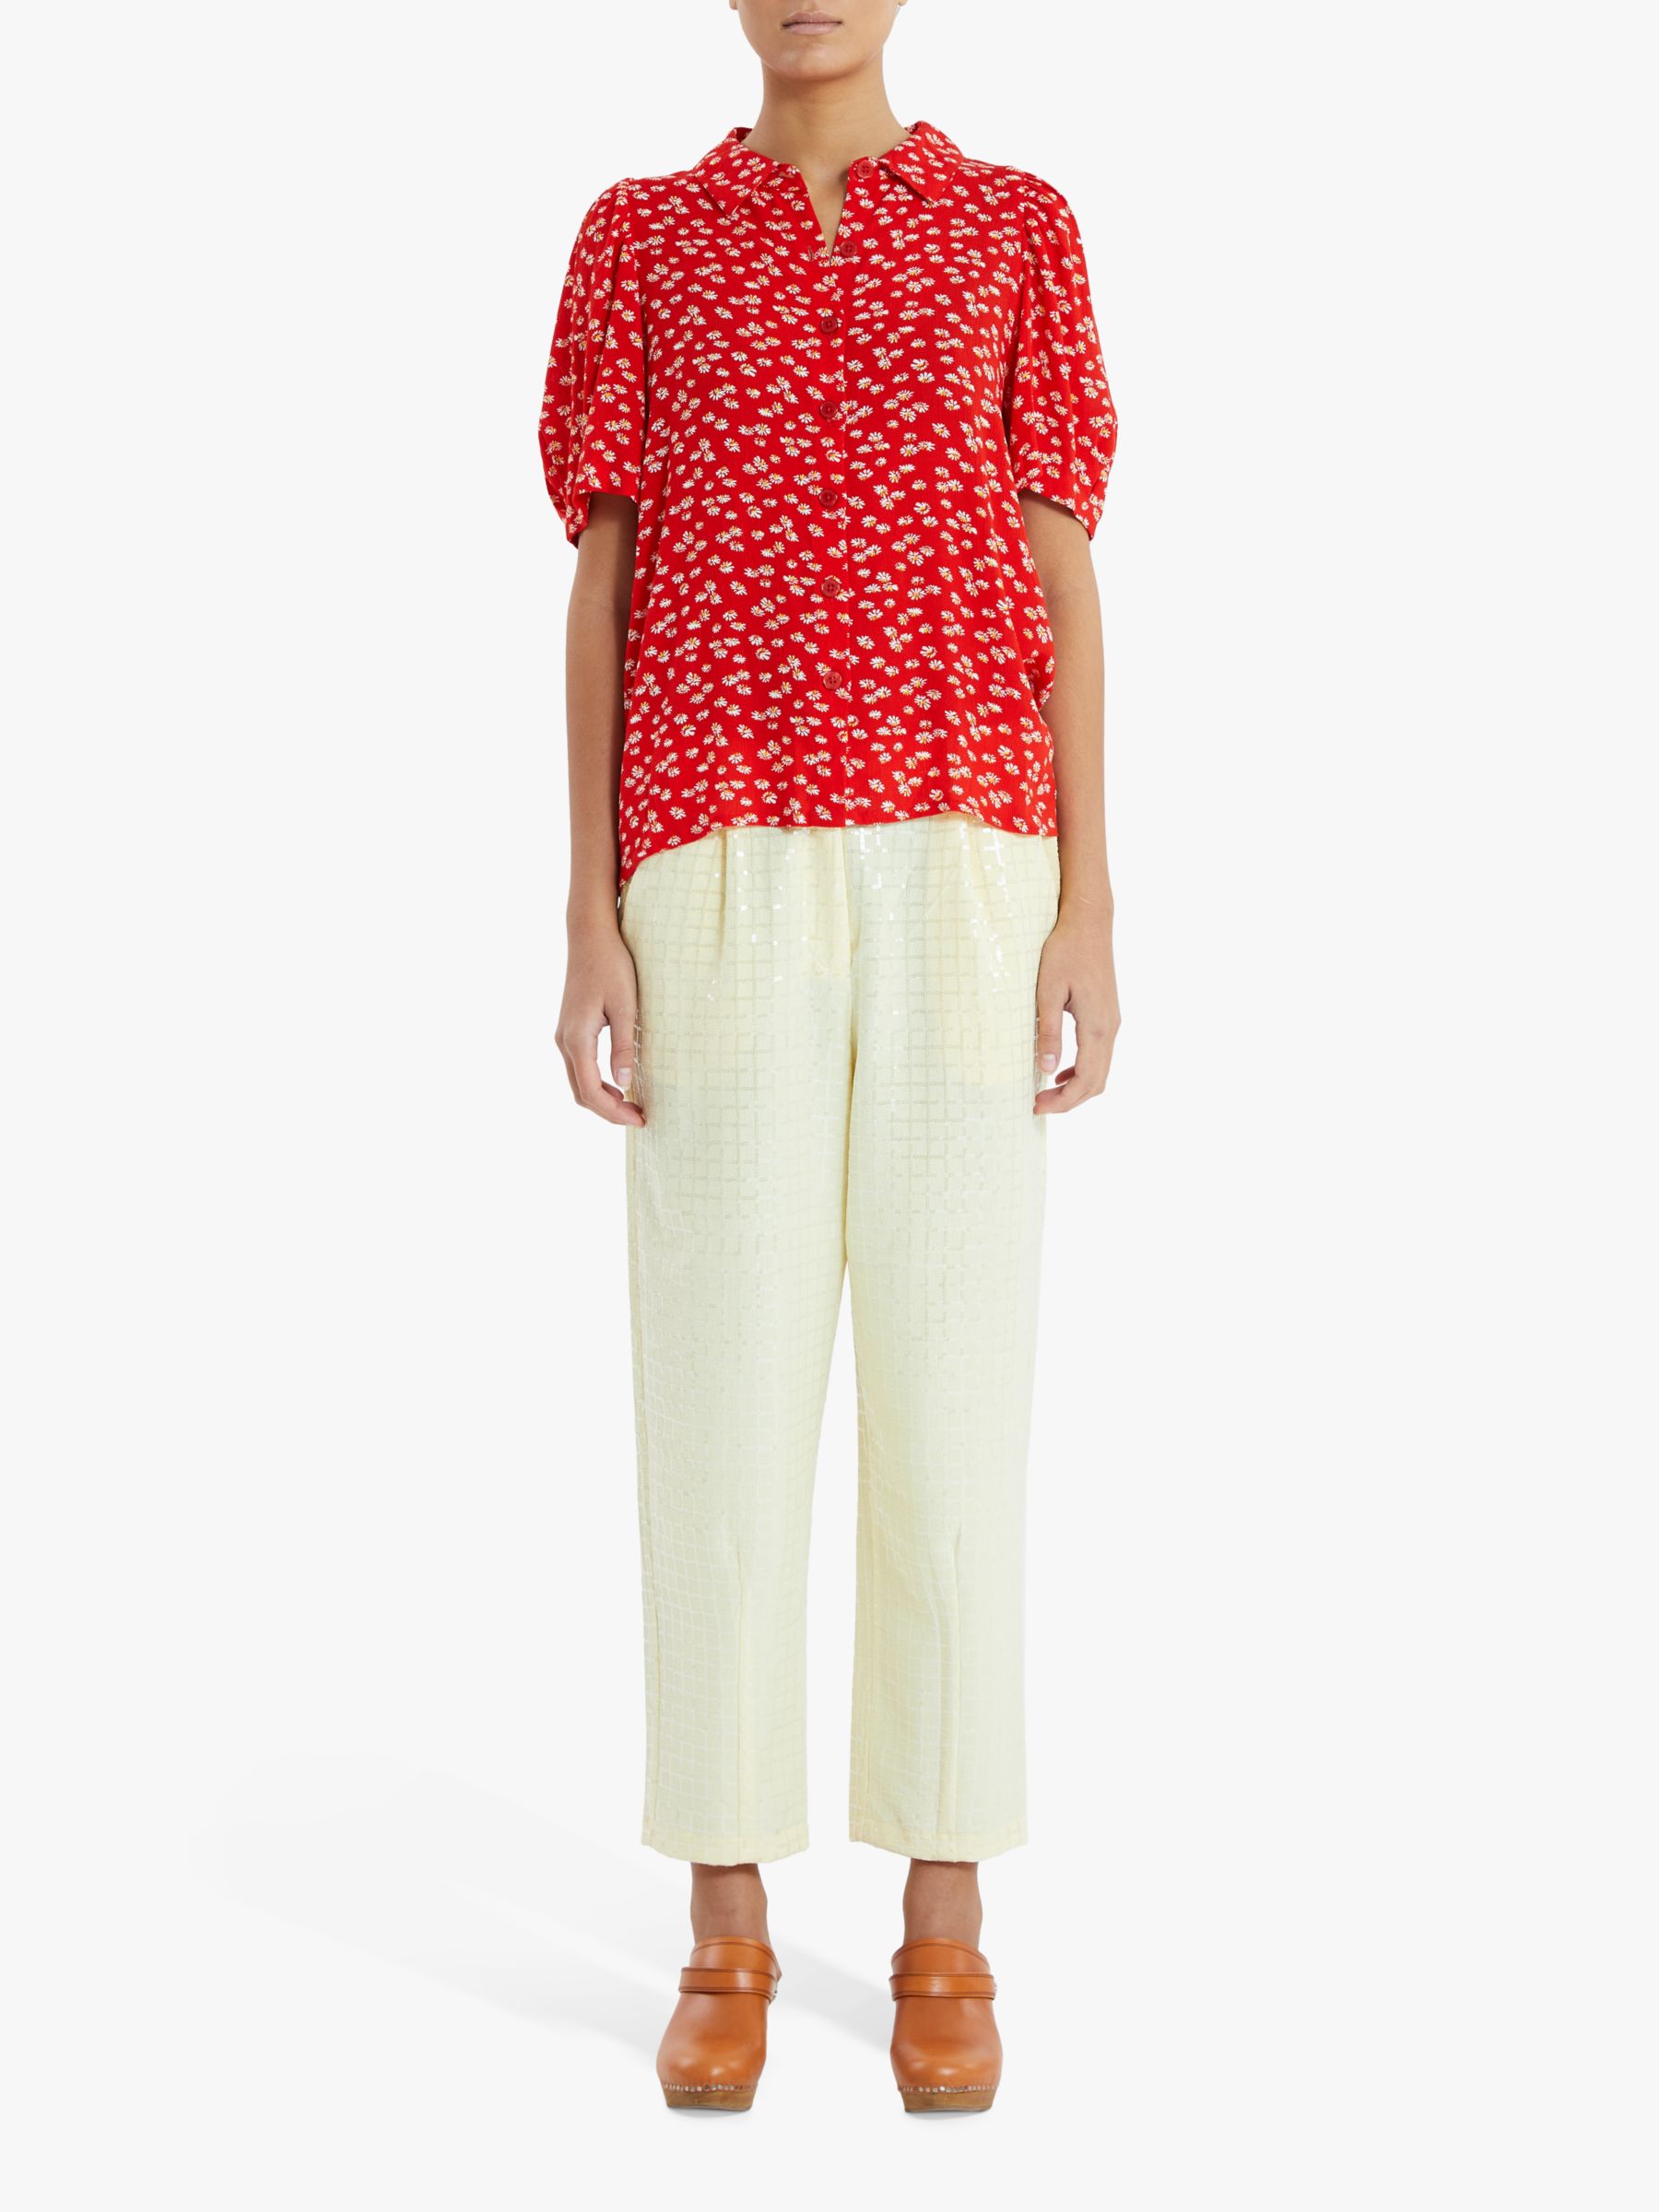 Lollys Laundry Floral Print Blouse, Red/White at John Lewis & Partners